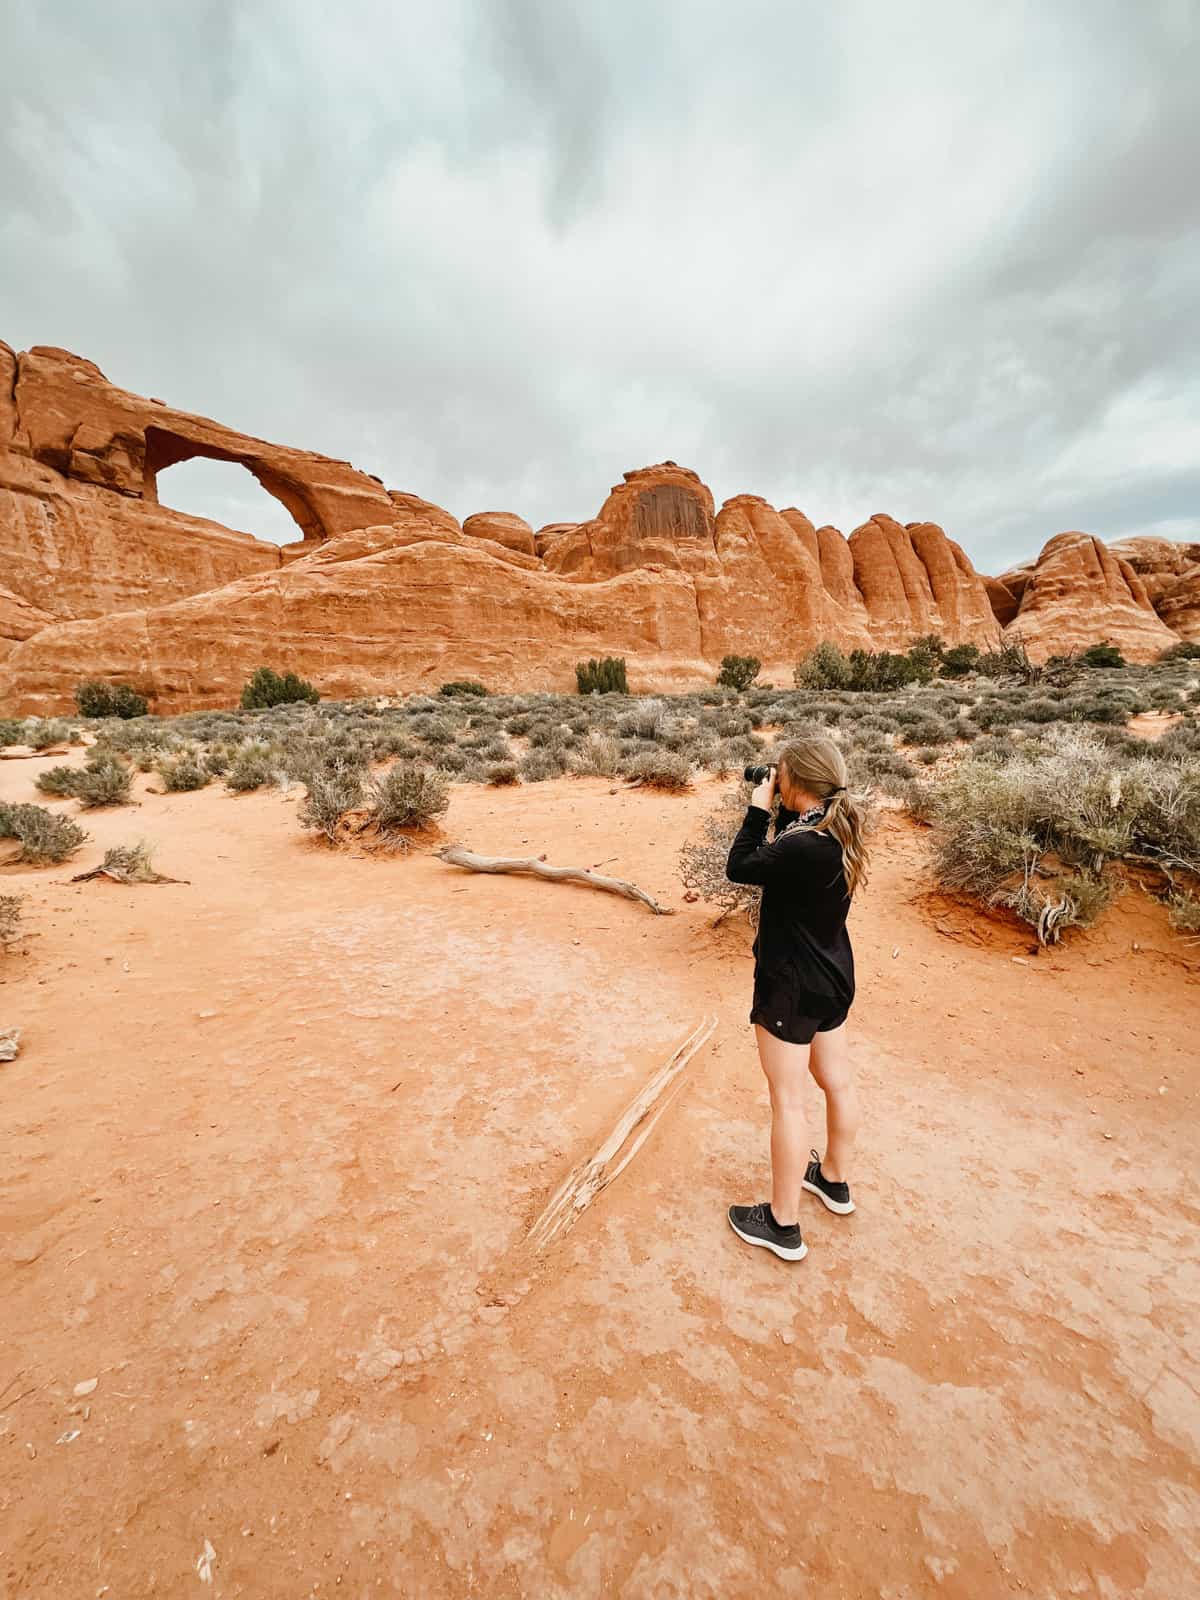 Abby taking pictures of the arches.